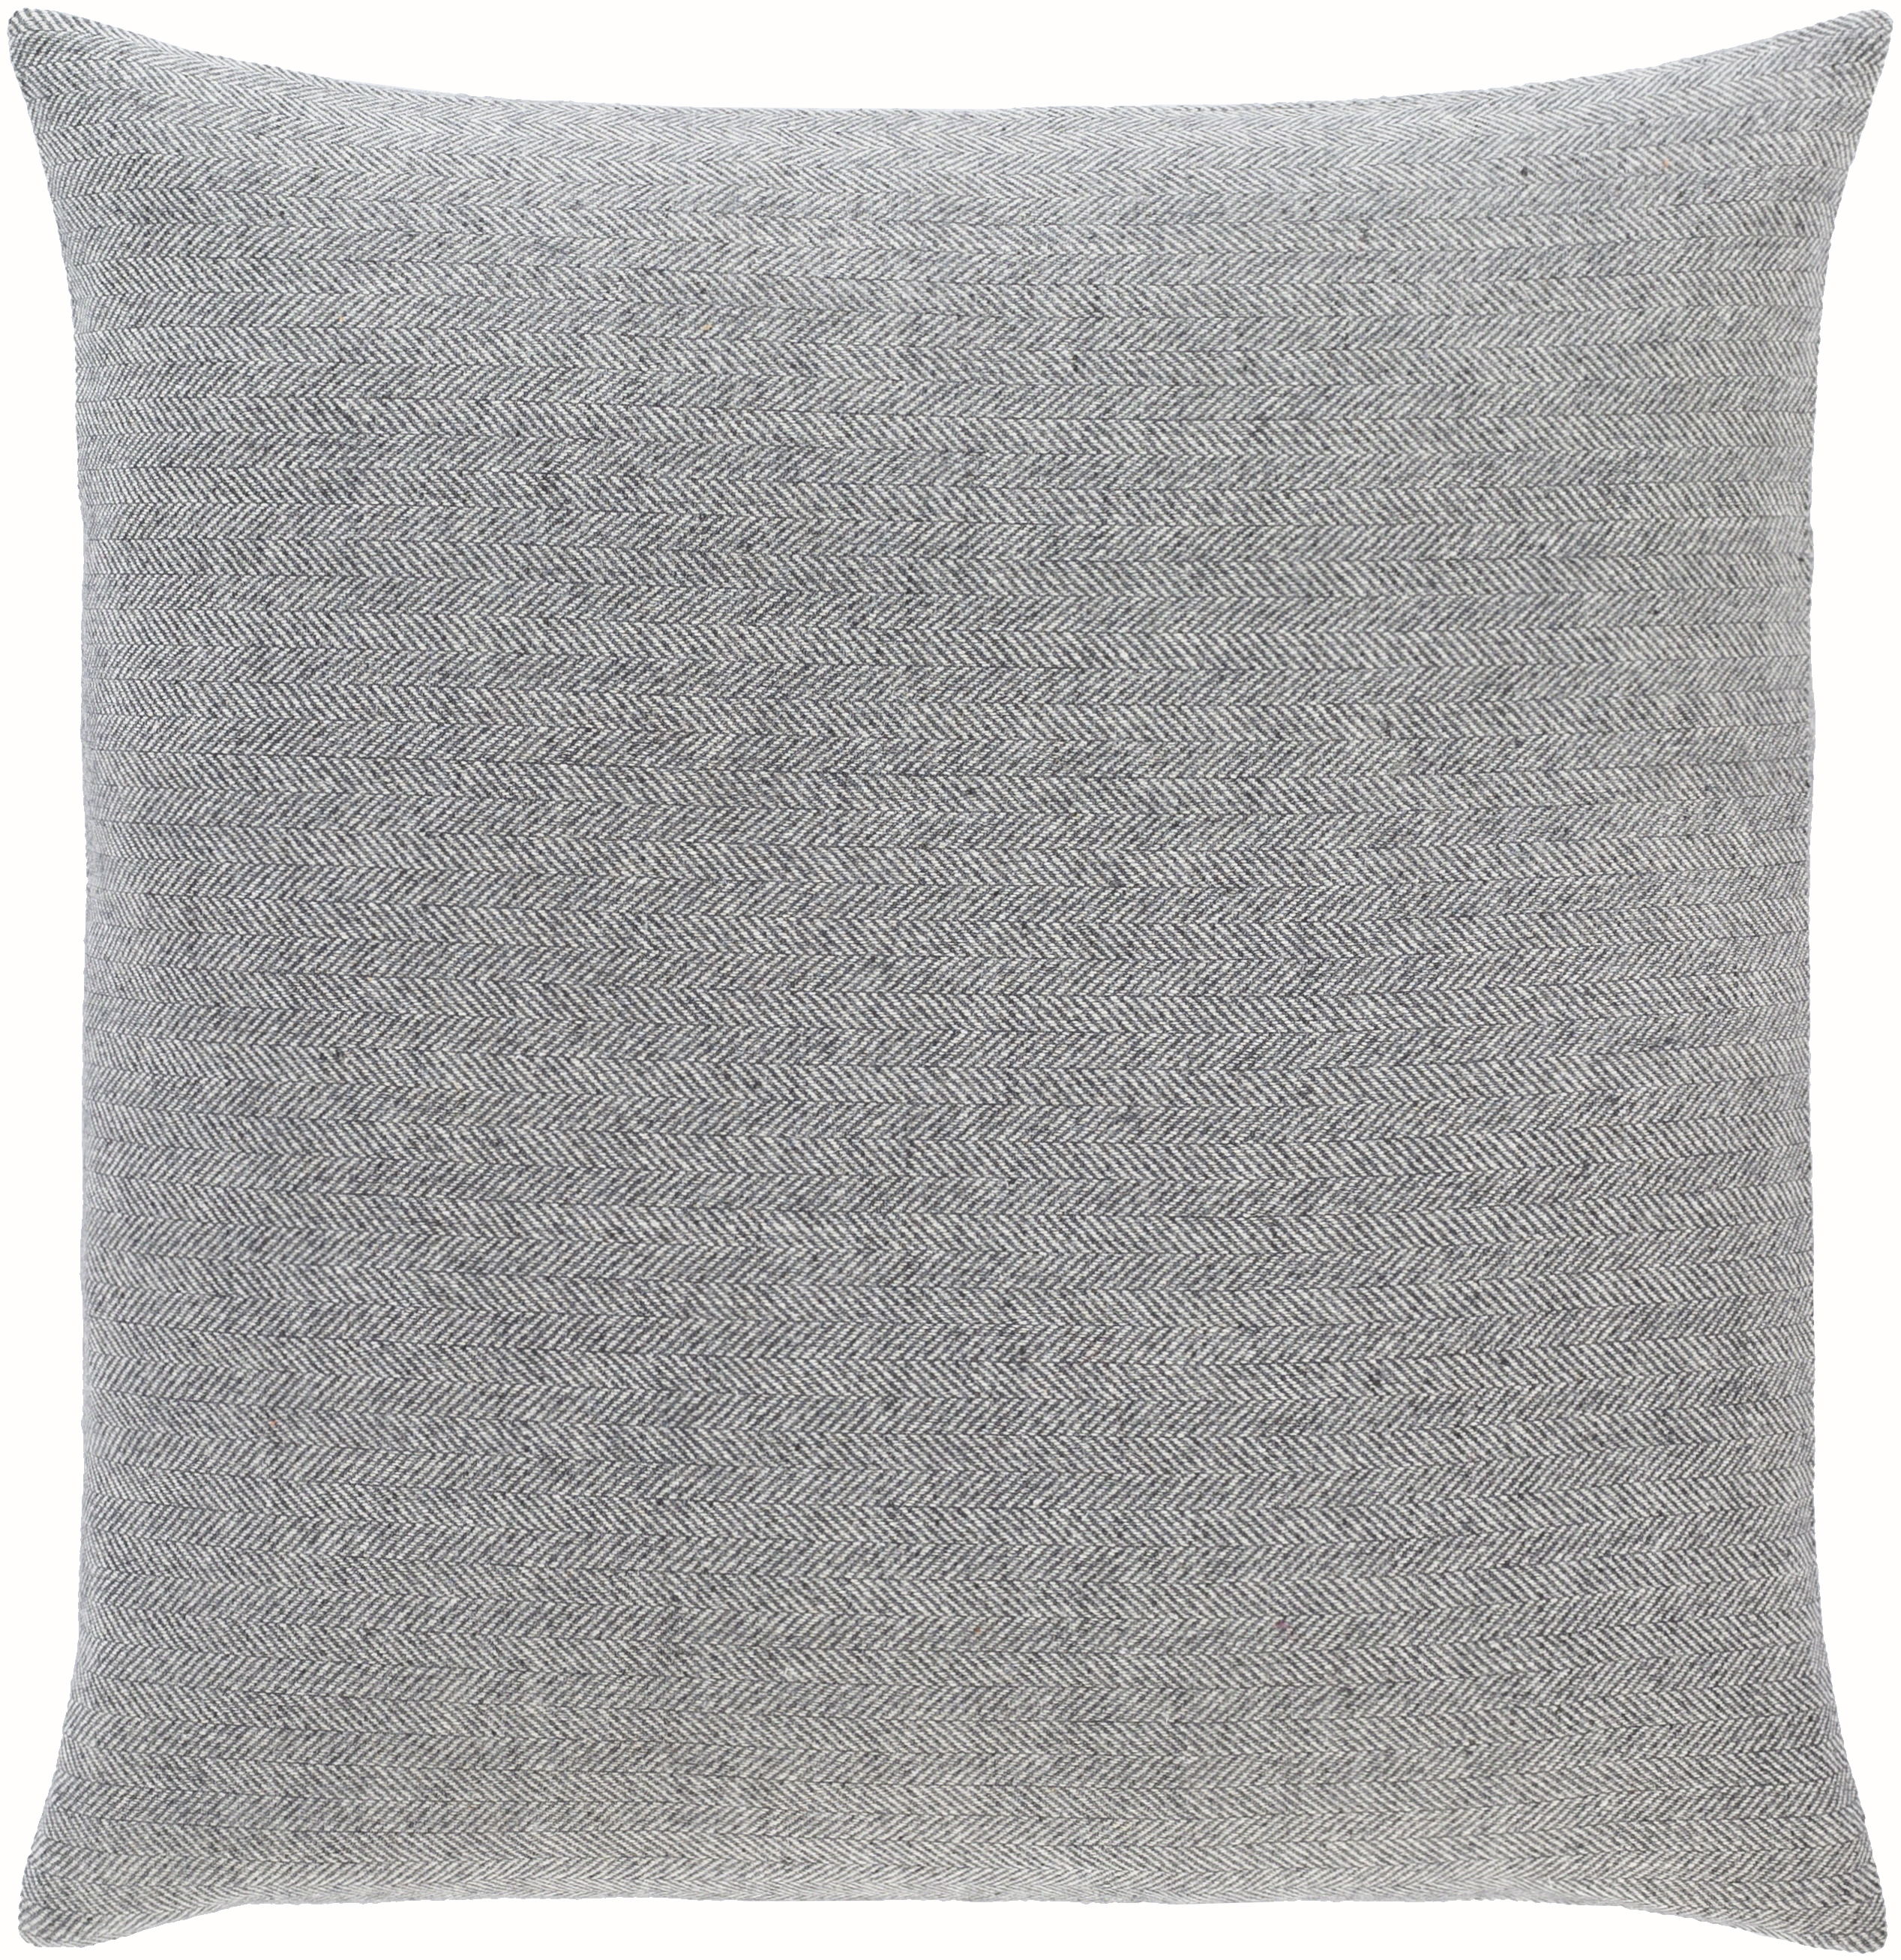 Brenley Throw Pillow, 18" x 18", with down insert - Image 0